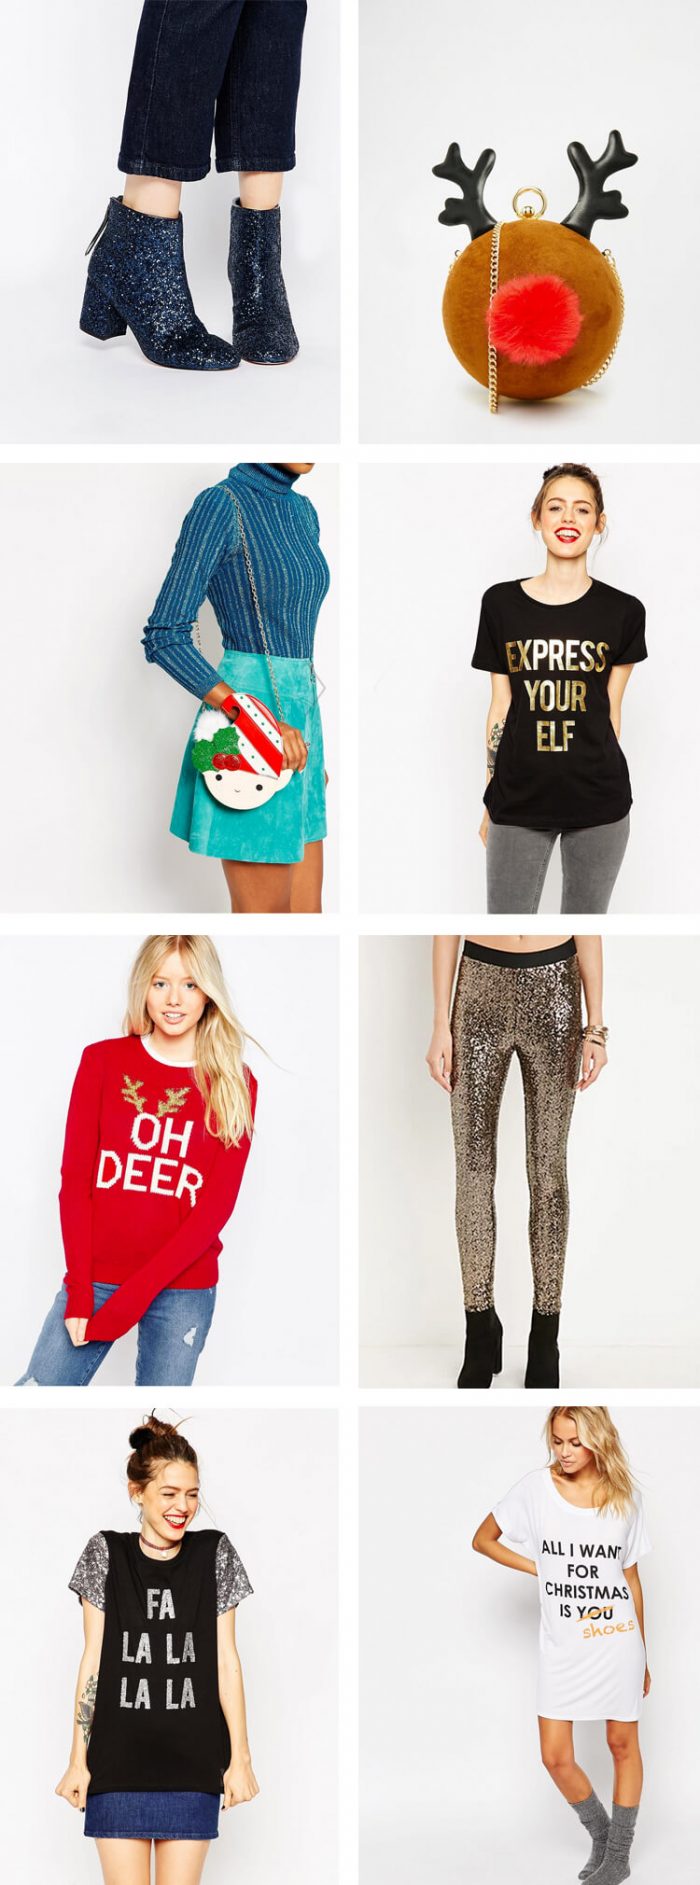 Christmas-Shopping-Gifts-Fashion-Outfits-ChristmasParty